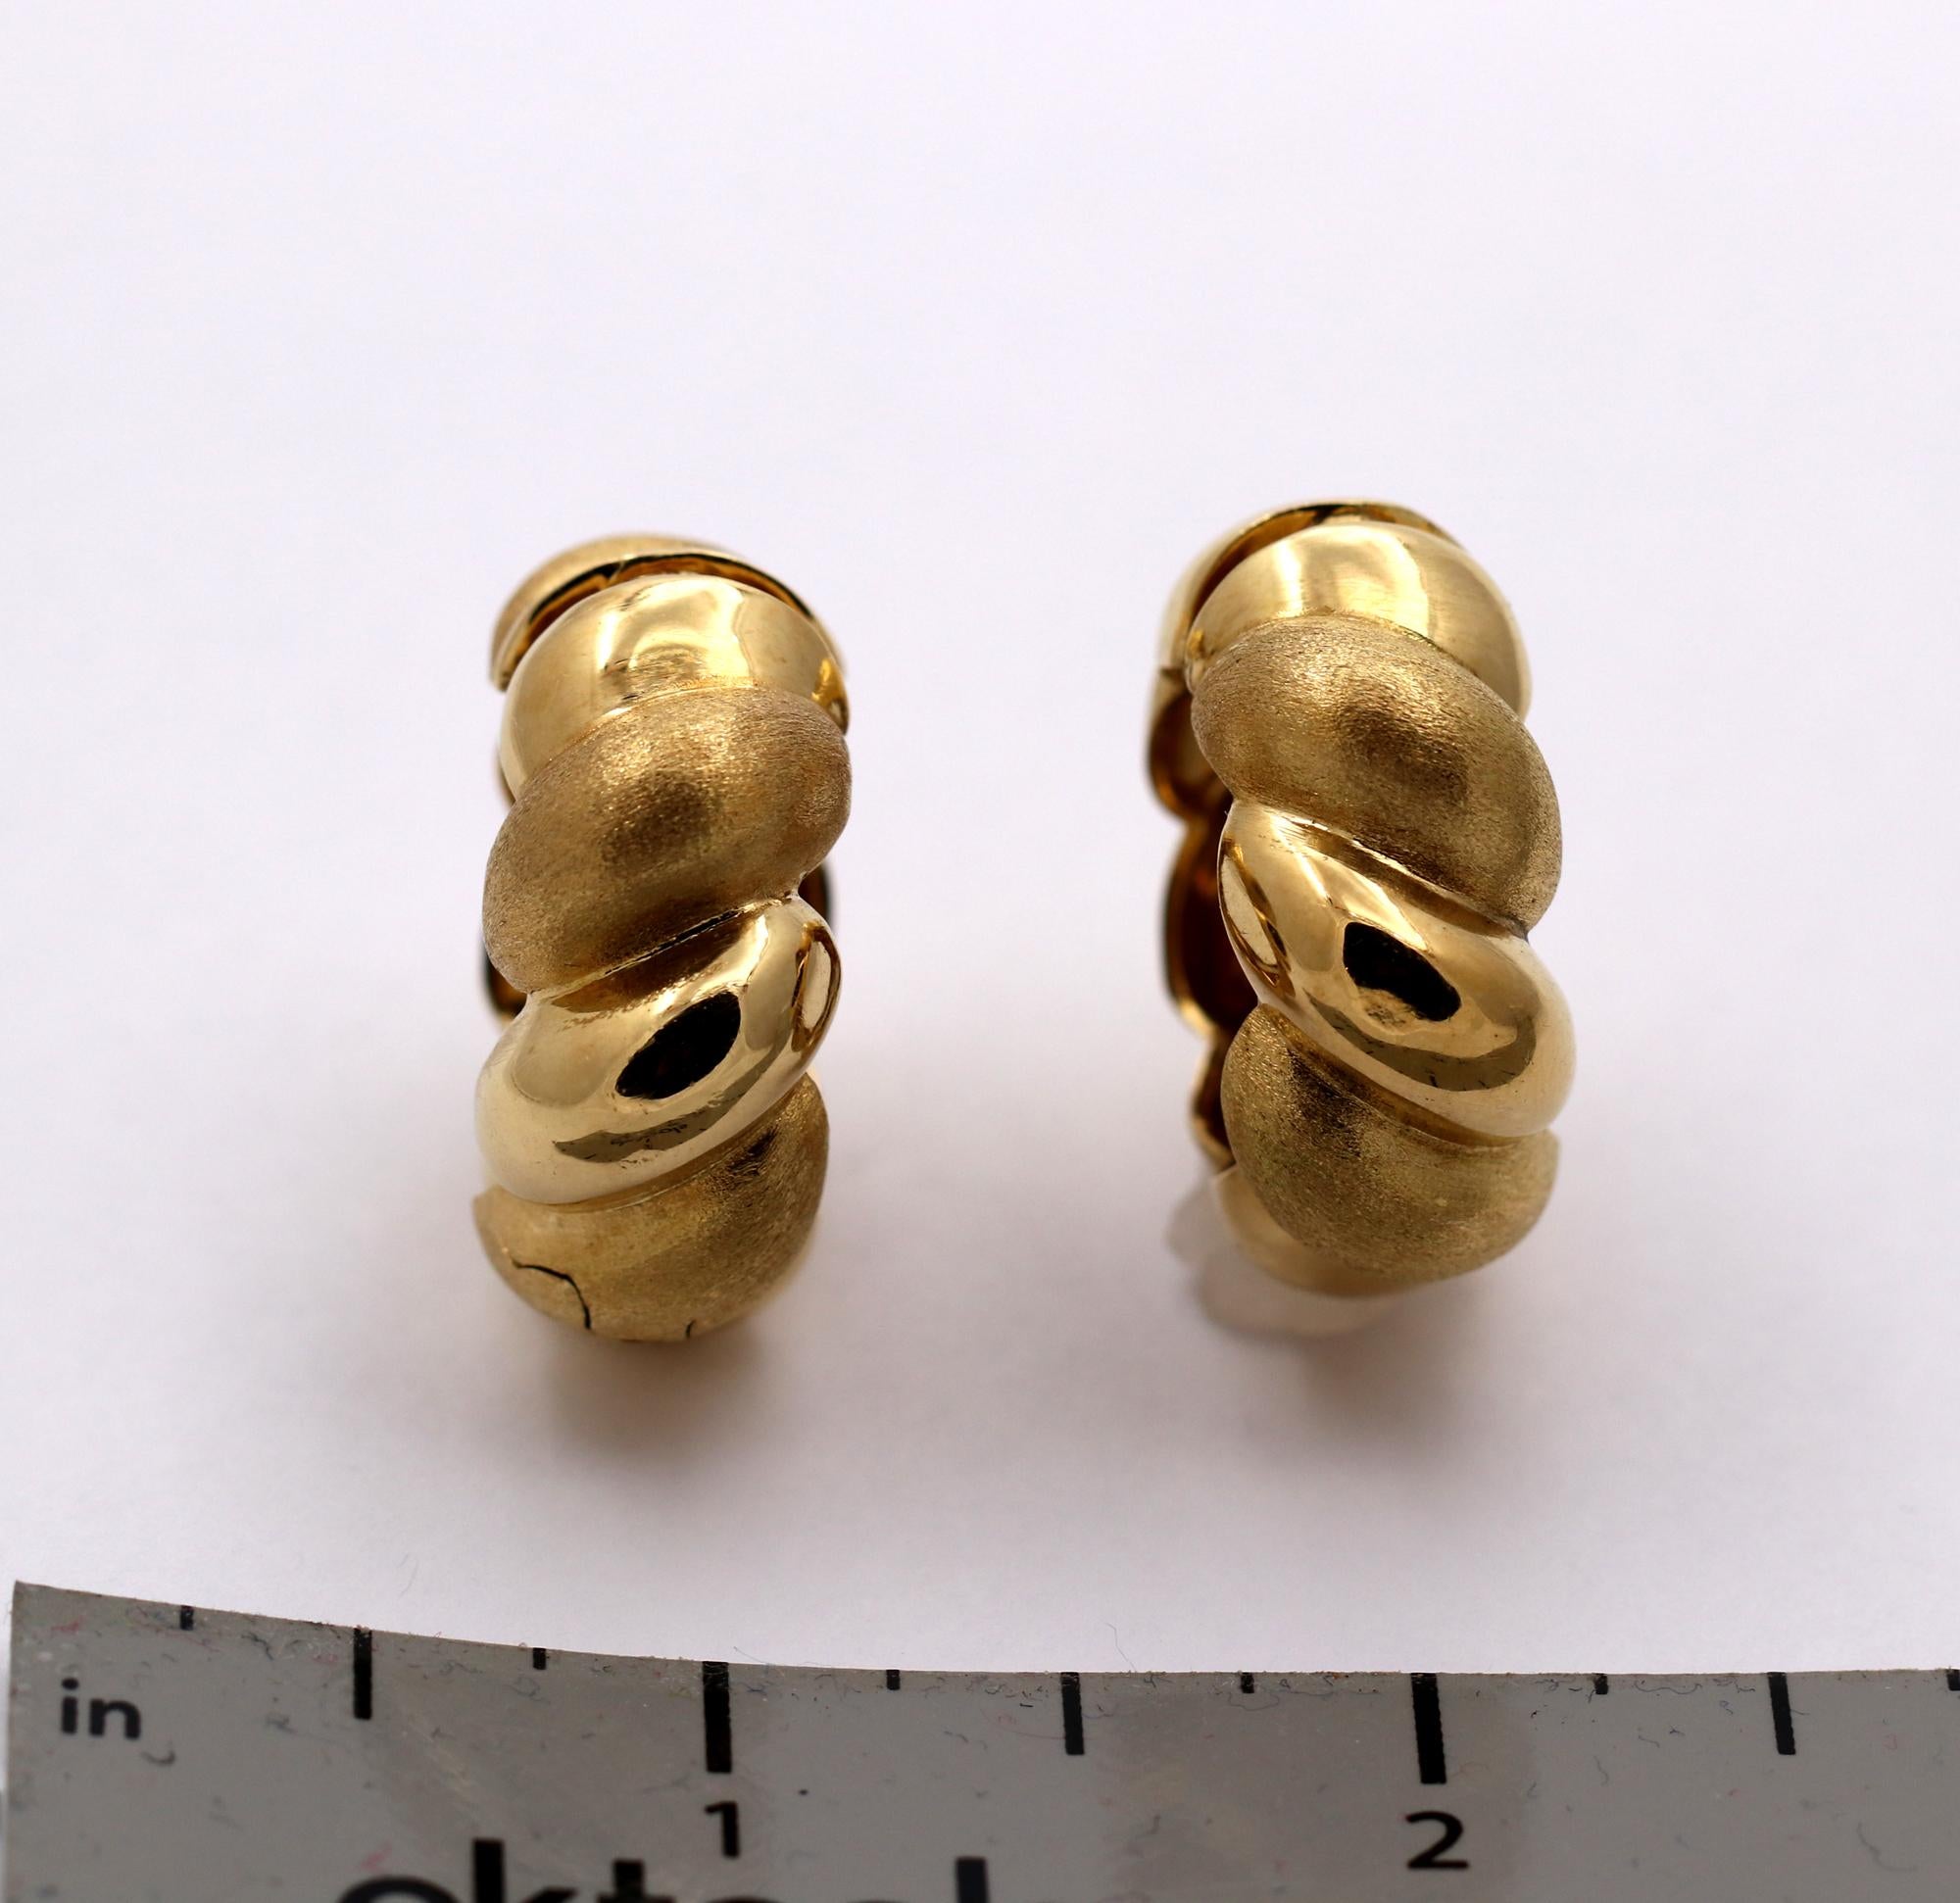 Florentine and Polished Finishes on Hinged Gold Hoop Earrings 2